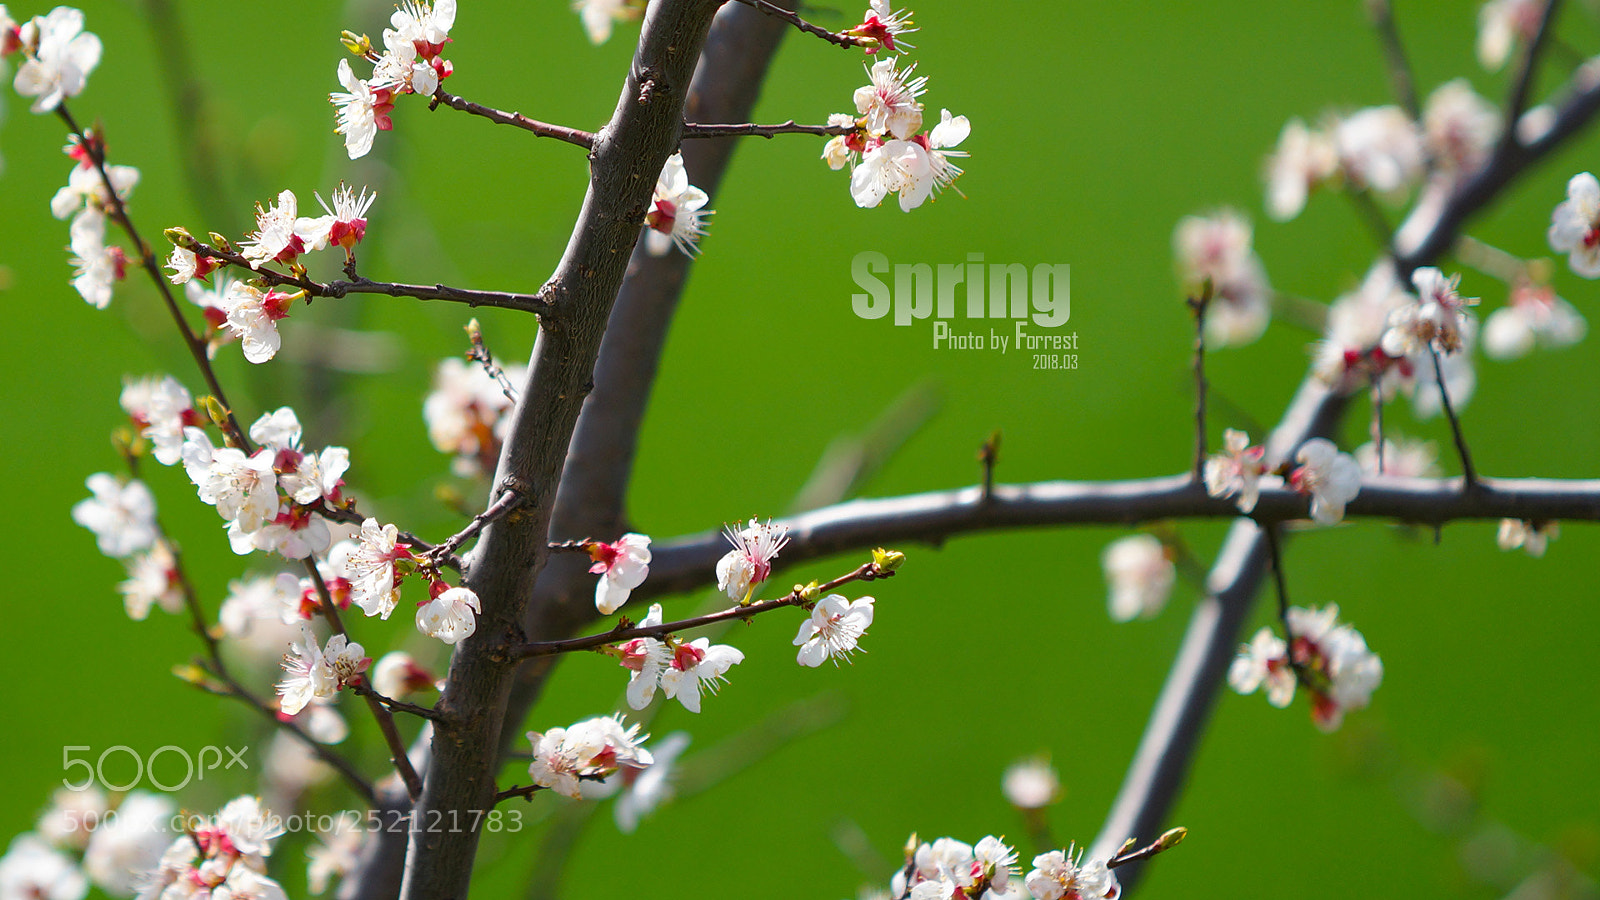 Sony a99 II sample photo. Spring photography